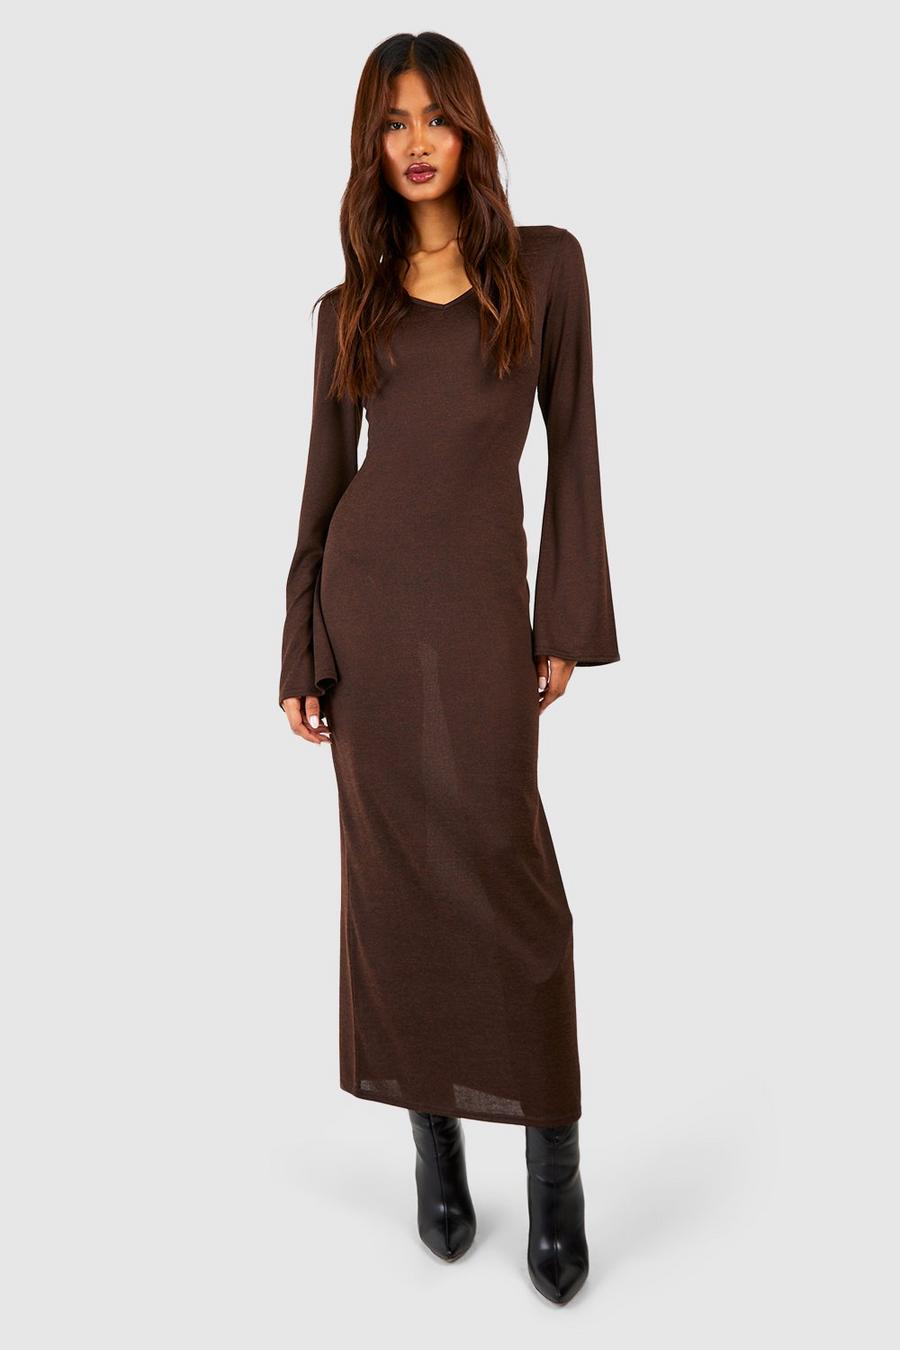 Chocolate brown Tall Lightweight Knitted V Neck Flare Sleev Midaxi Dress